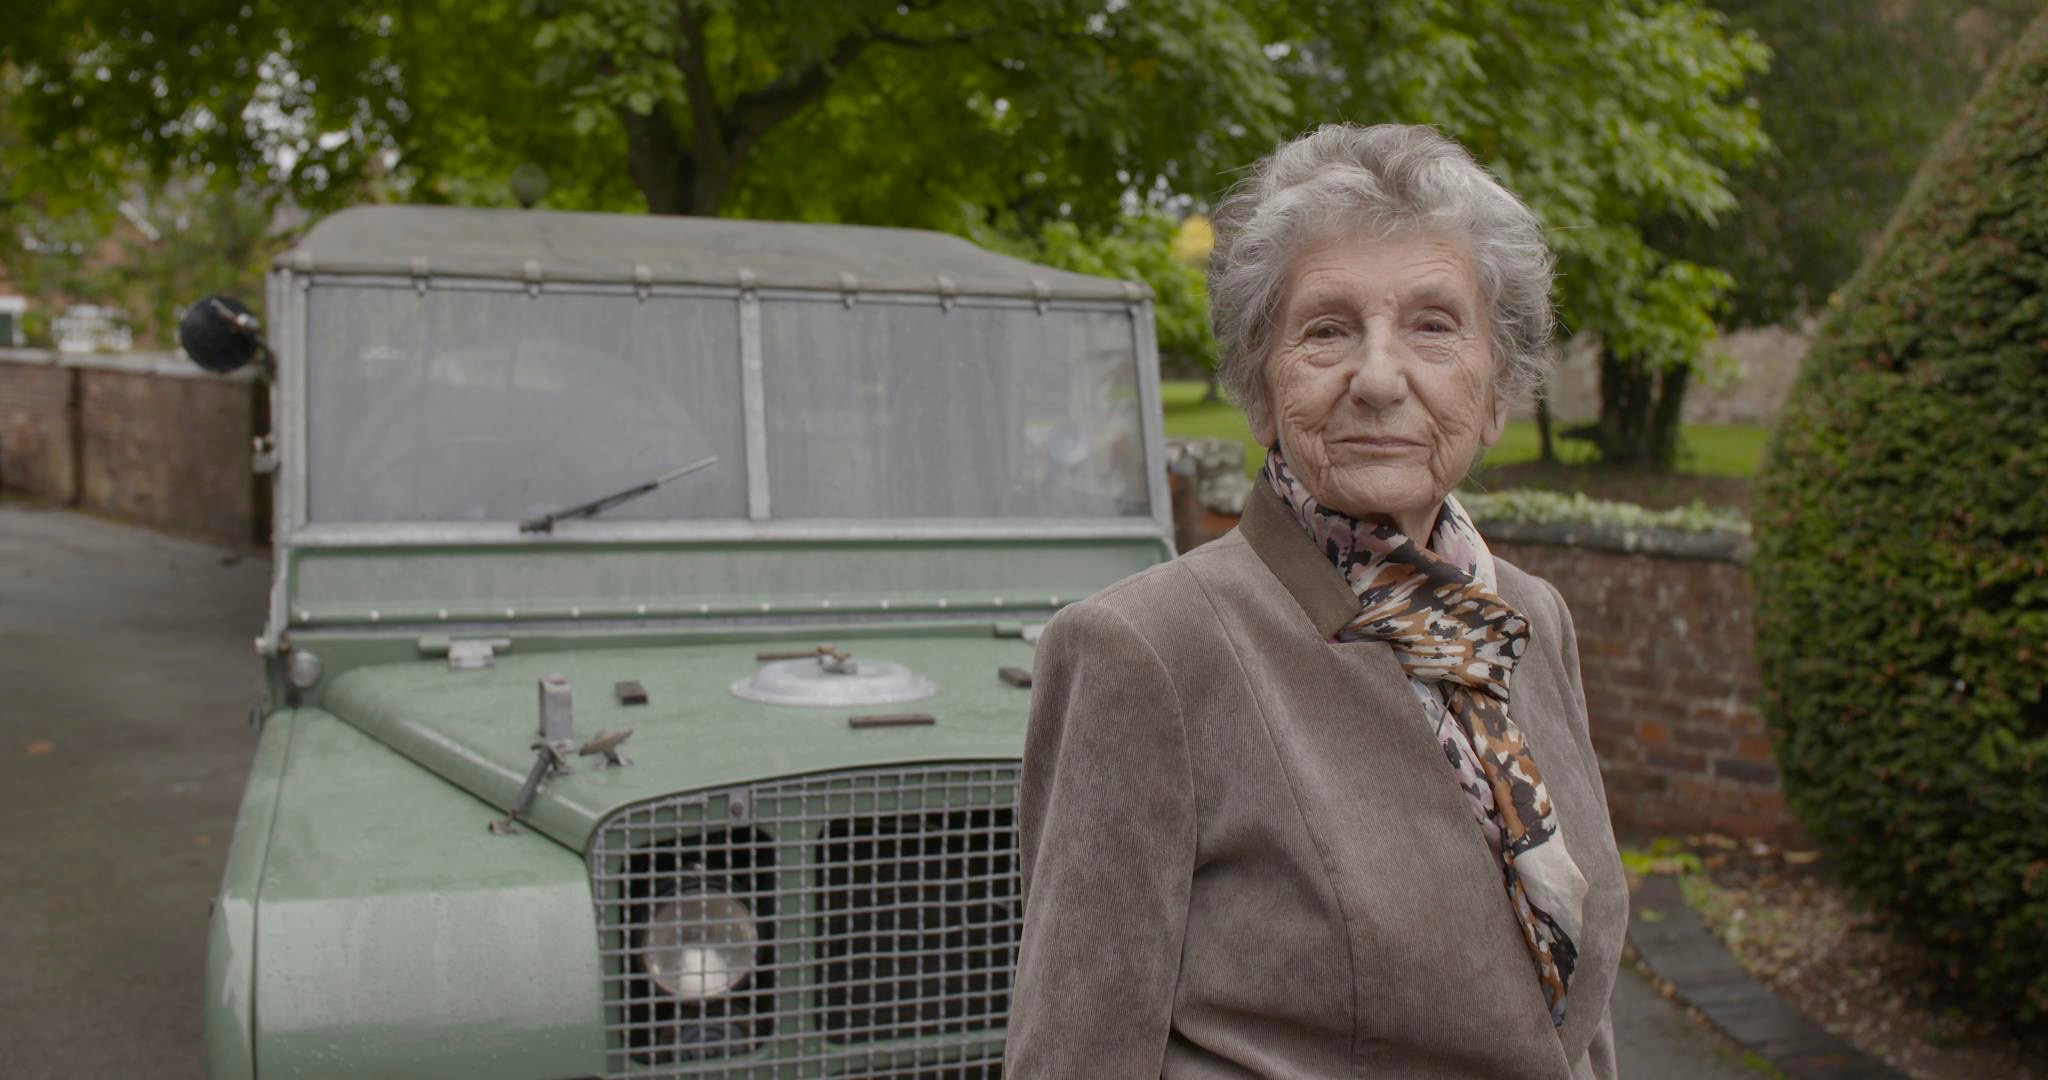 Memory lane, At 87, she gets a literal ride along Land Rover memory lane, ClassicCars.com Journal